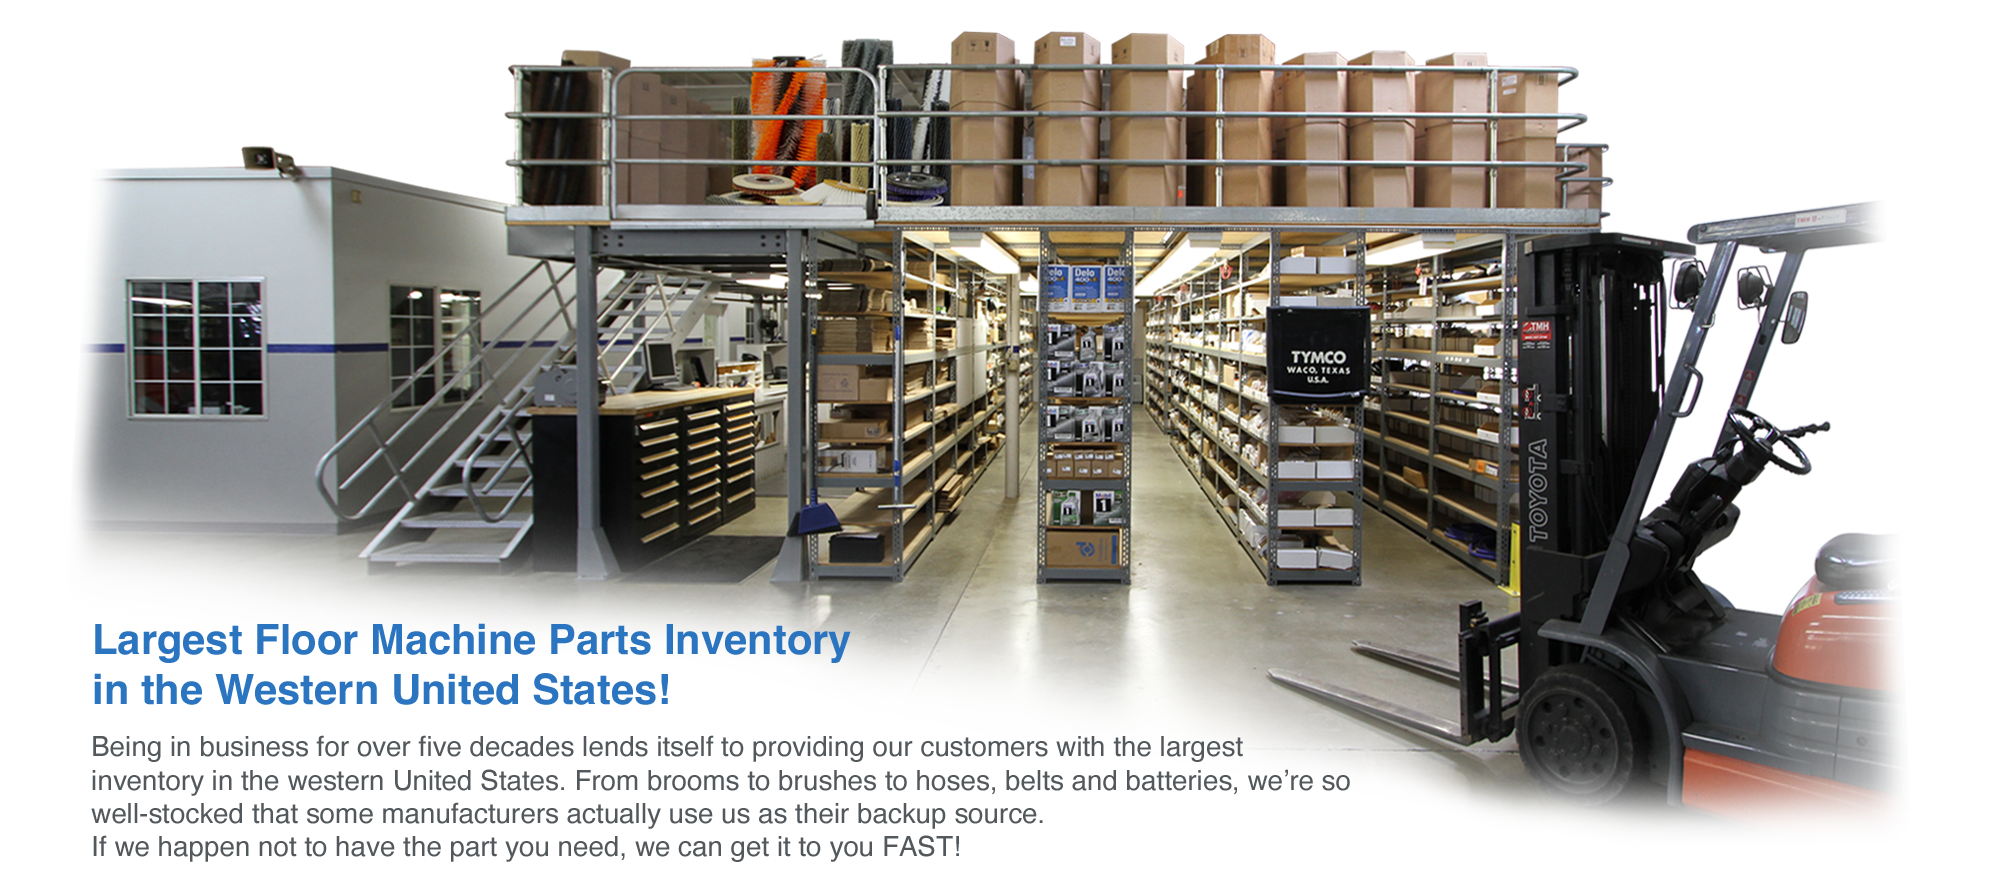 Being in business for over four decades lends itself to providing our customers with the largest inventory in the western United States. From brooms to brushes to hoses, belts and batteries, we’re so well-stocked that some manufacturers actually use us as their backup source for their own dealers. If we happen not to have the part you need, we can get it to you FAST!